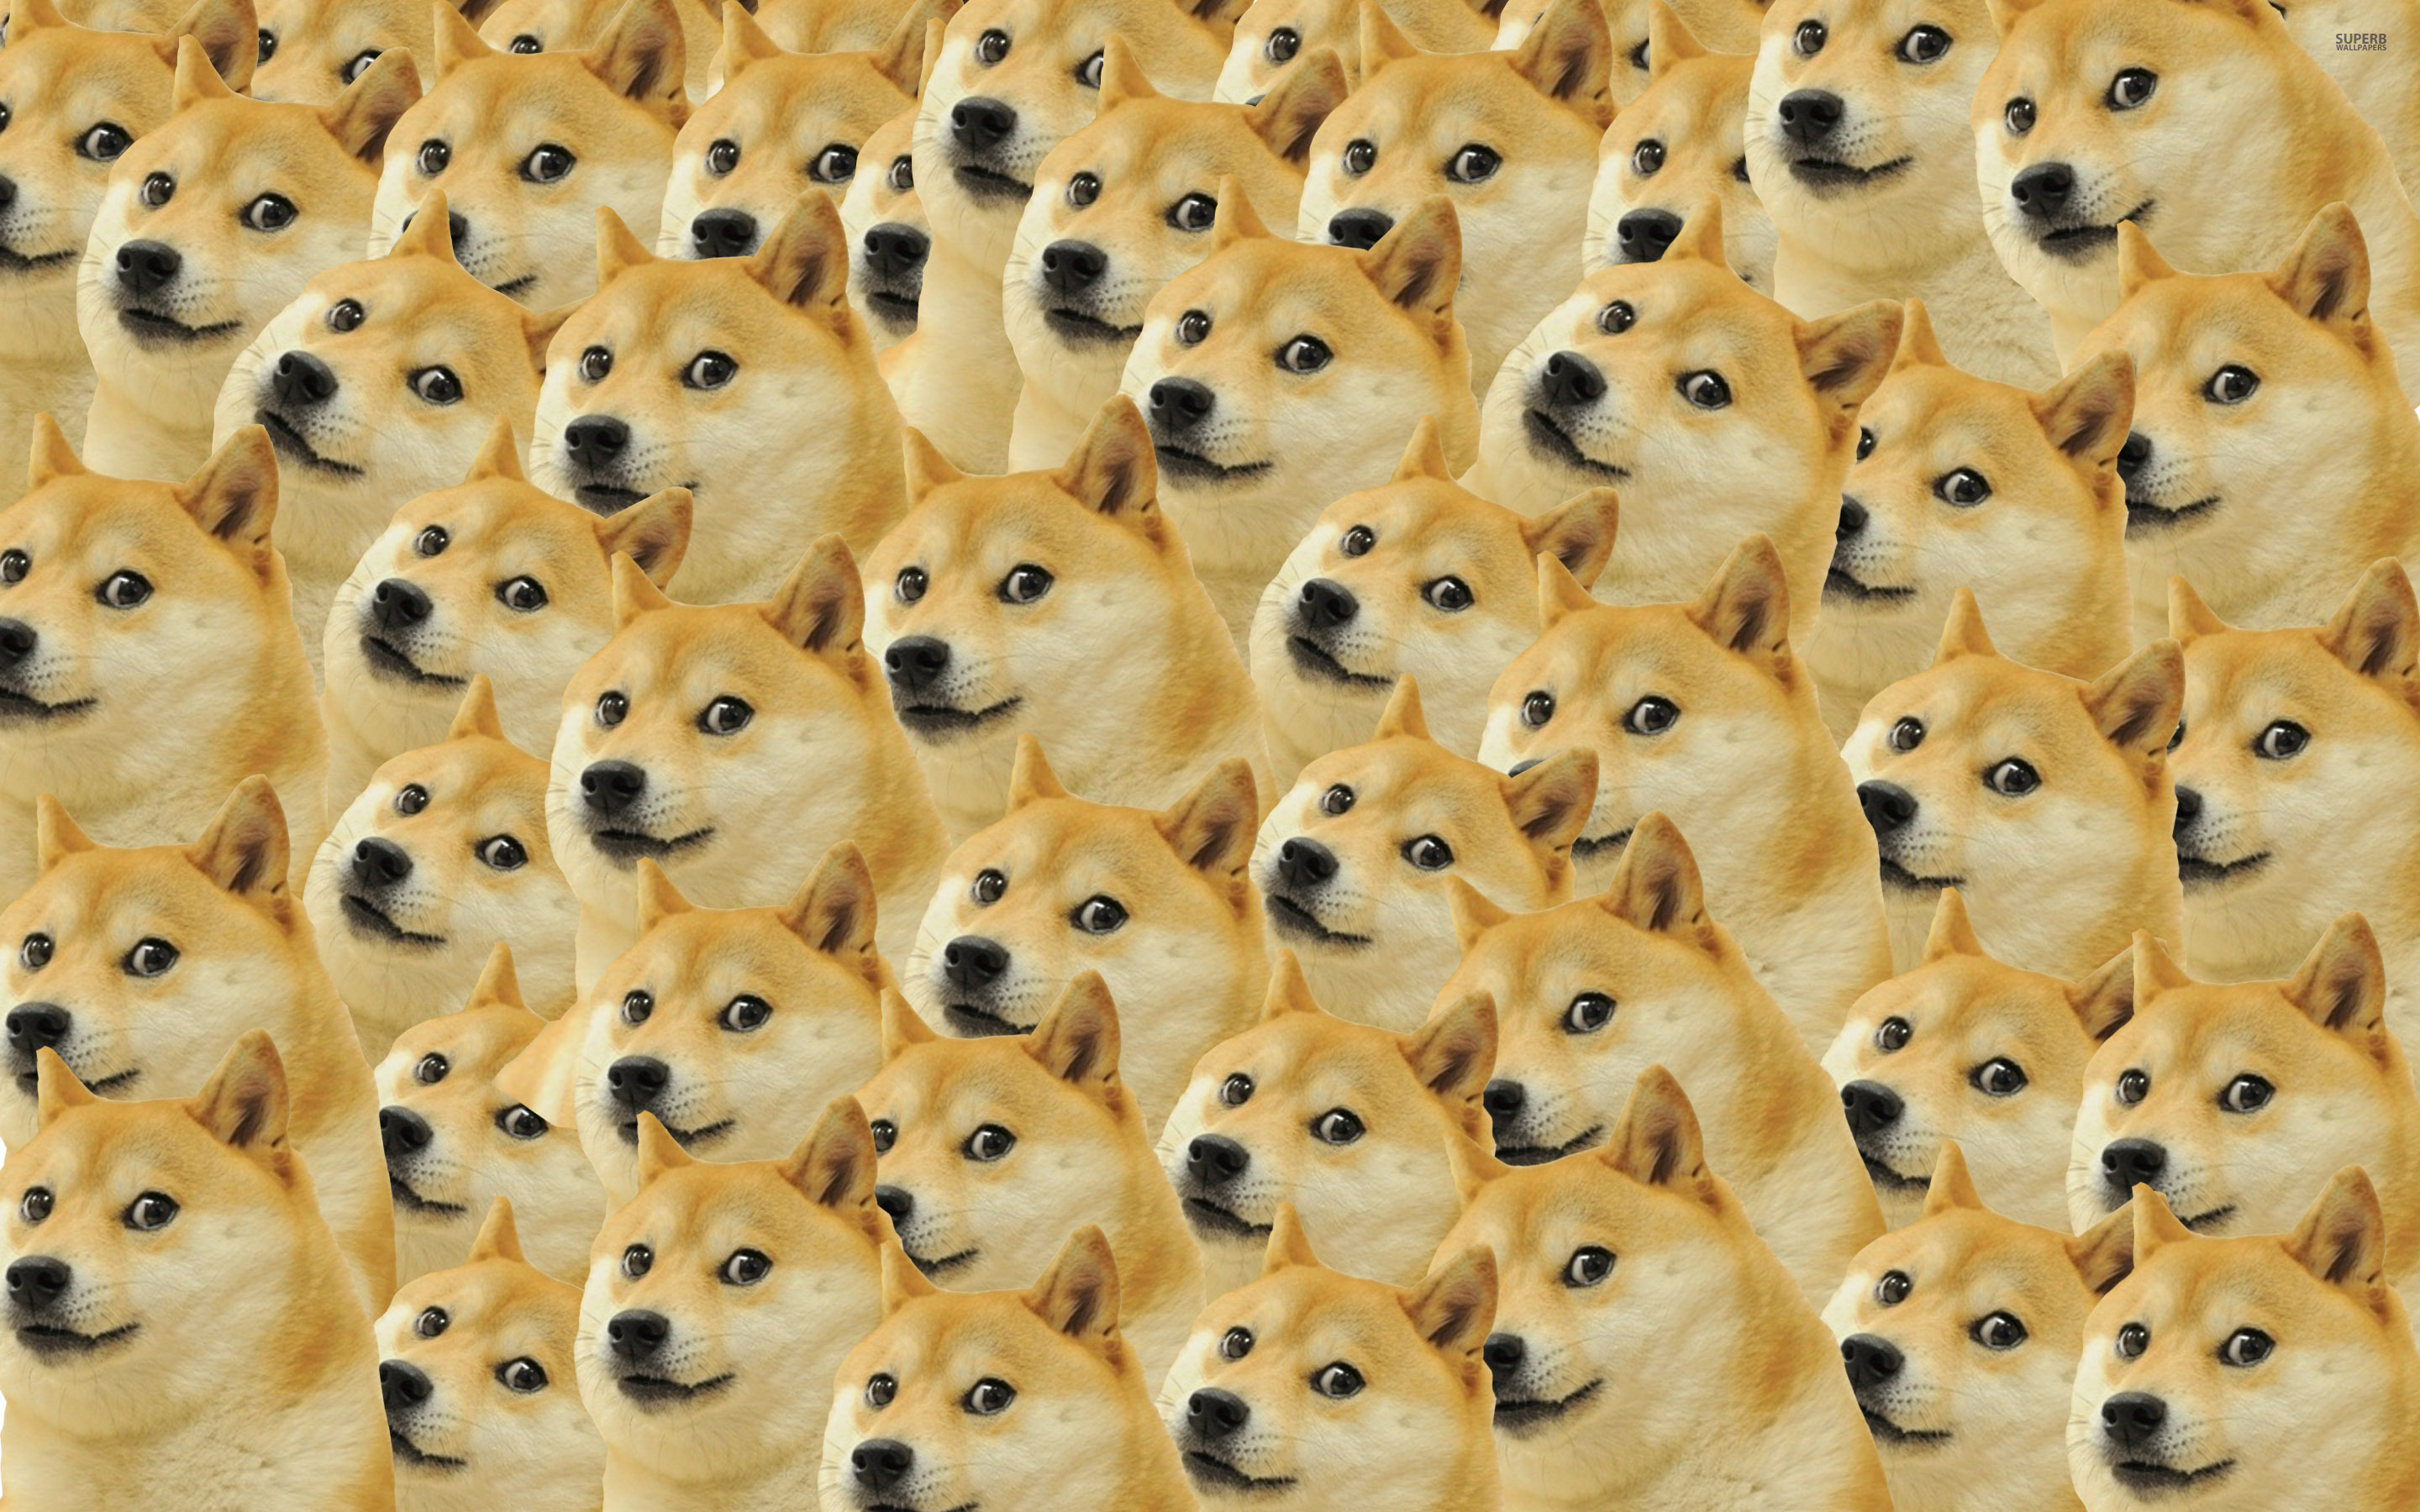 Doge Wallpapers Humor Hq Doge Pictures 4k Wallpapers 2019 - pokemon roblox doge